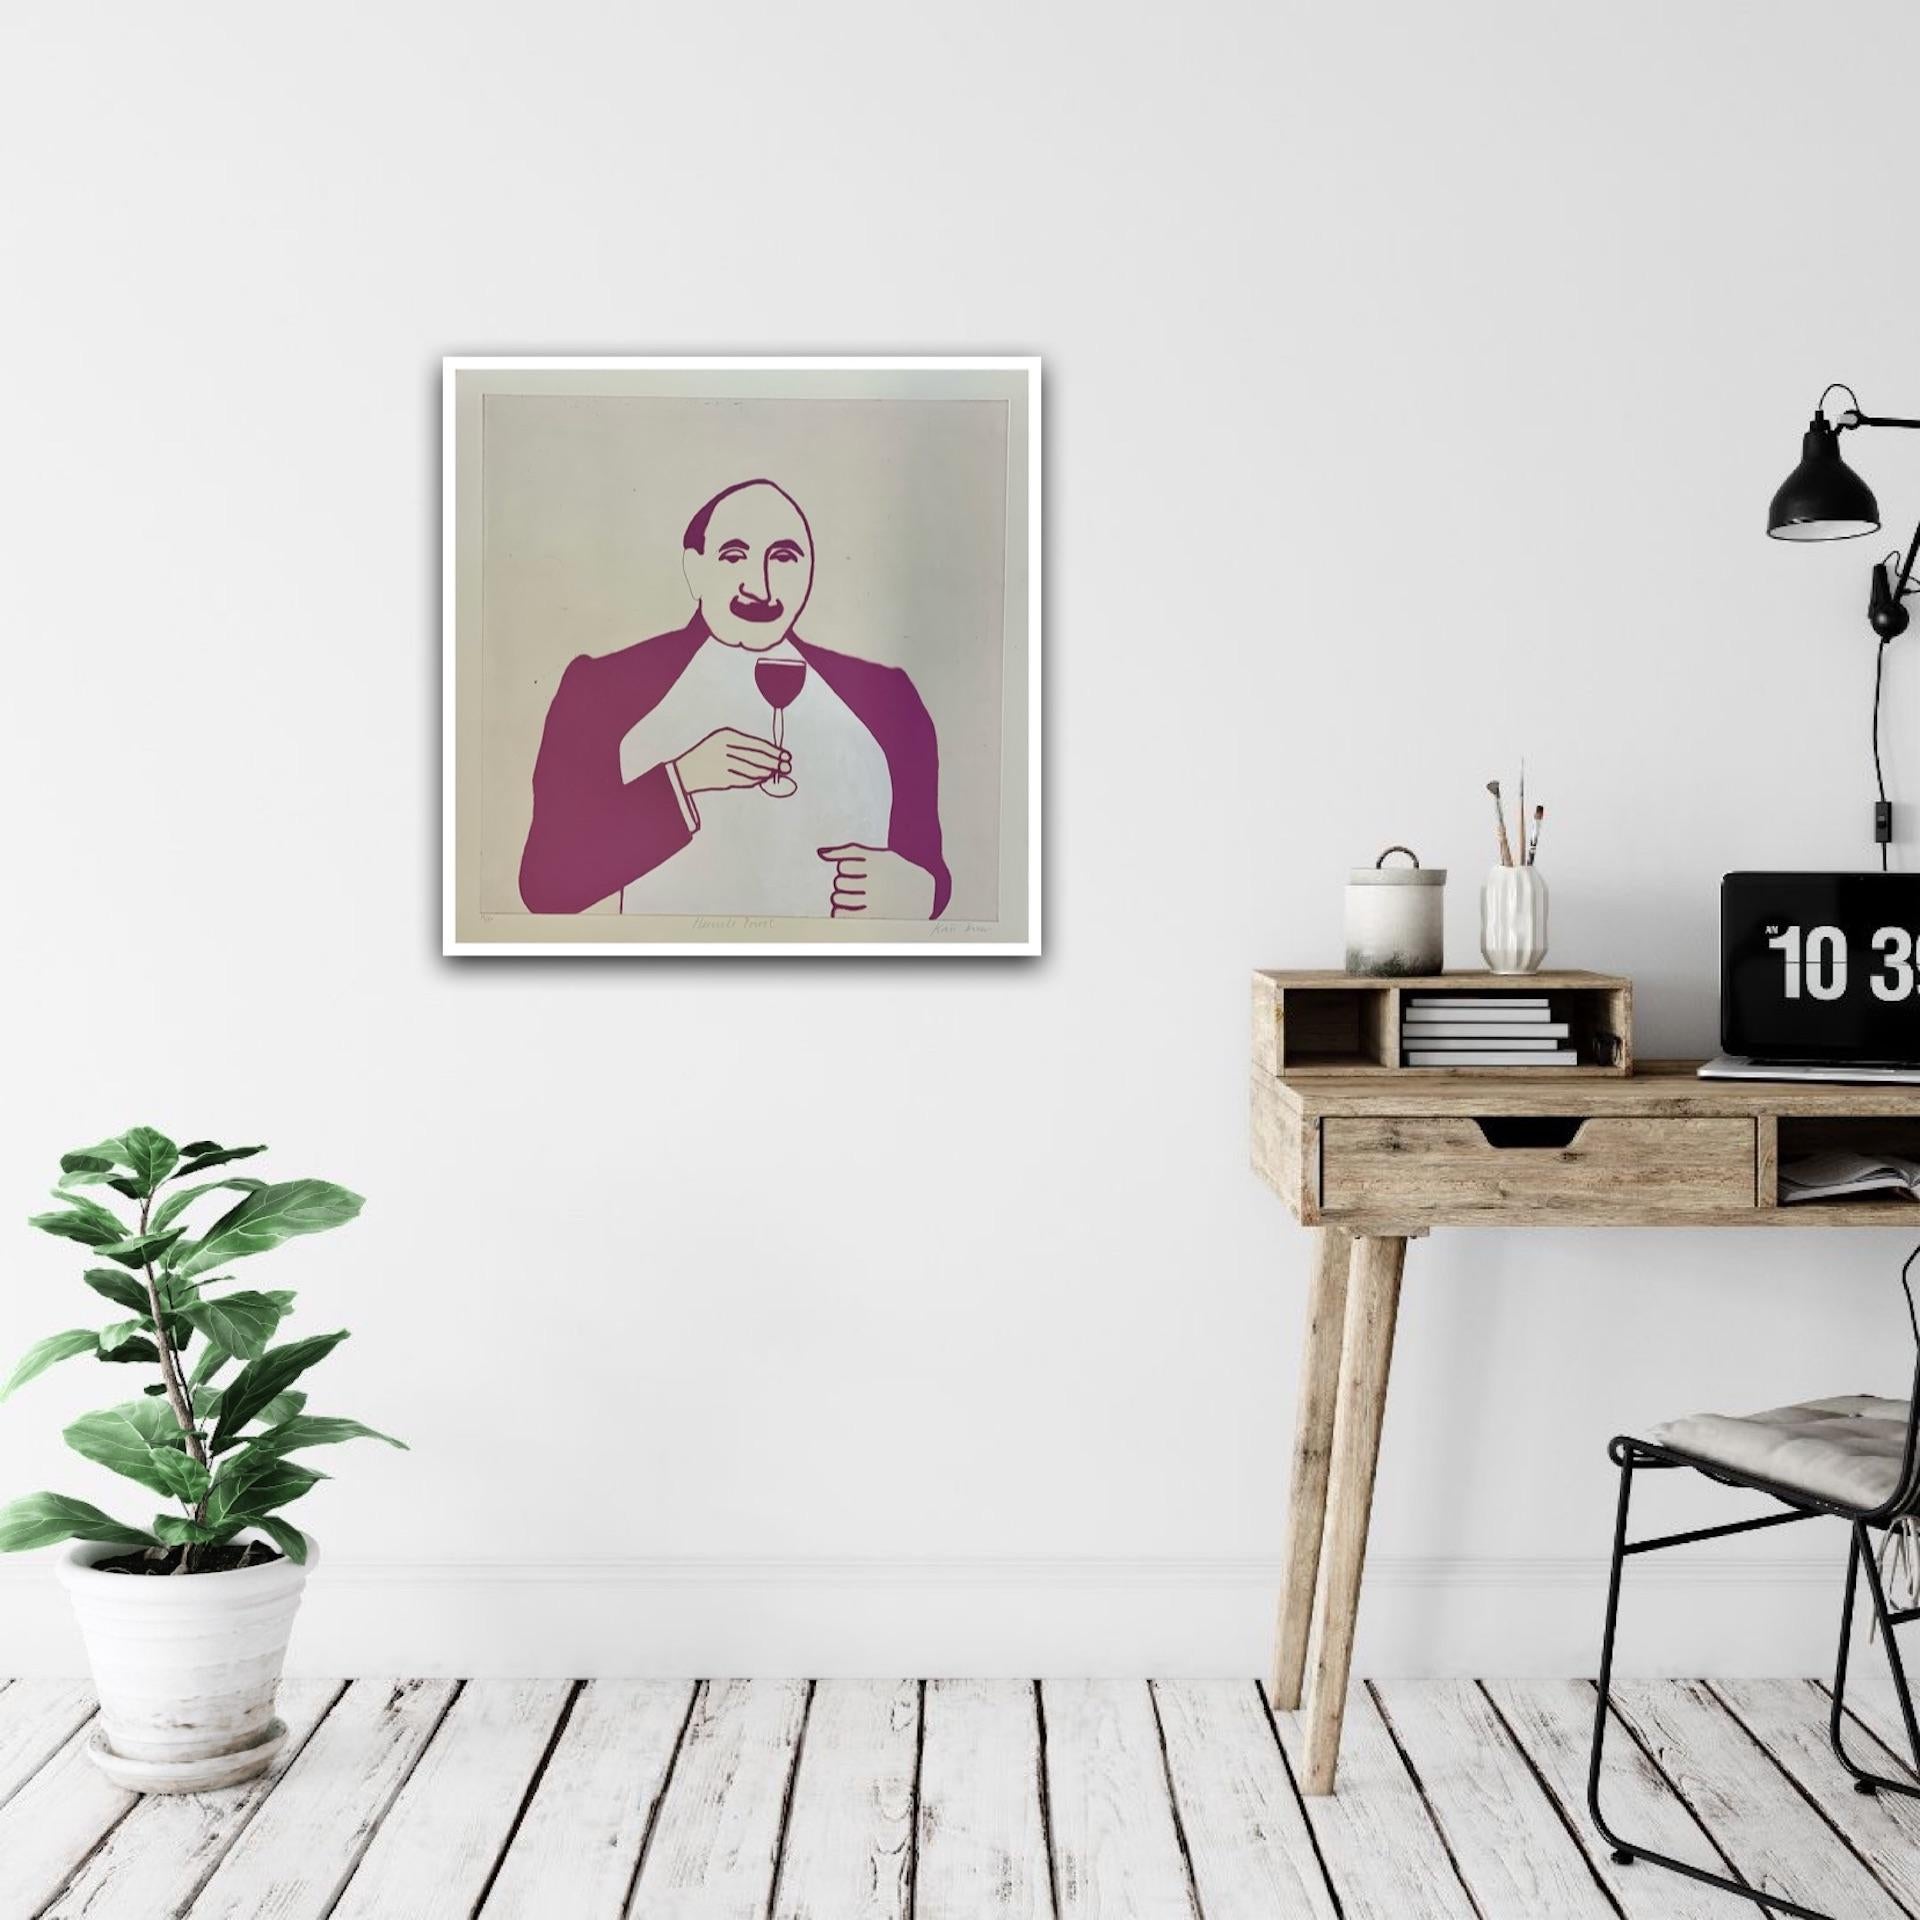 Hercule Poirot by Kate Boxer [2021]
limited_edition

Drypoint print on paper

Edition number 30

Image size: H:69.5 cm x W:69.5 cm

Complete Size of Unframed Work: H:77.5 cm x W:77.5 cm x D:0.1cm

Sold Unframed

Please note that insitu images are